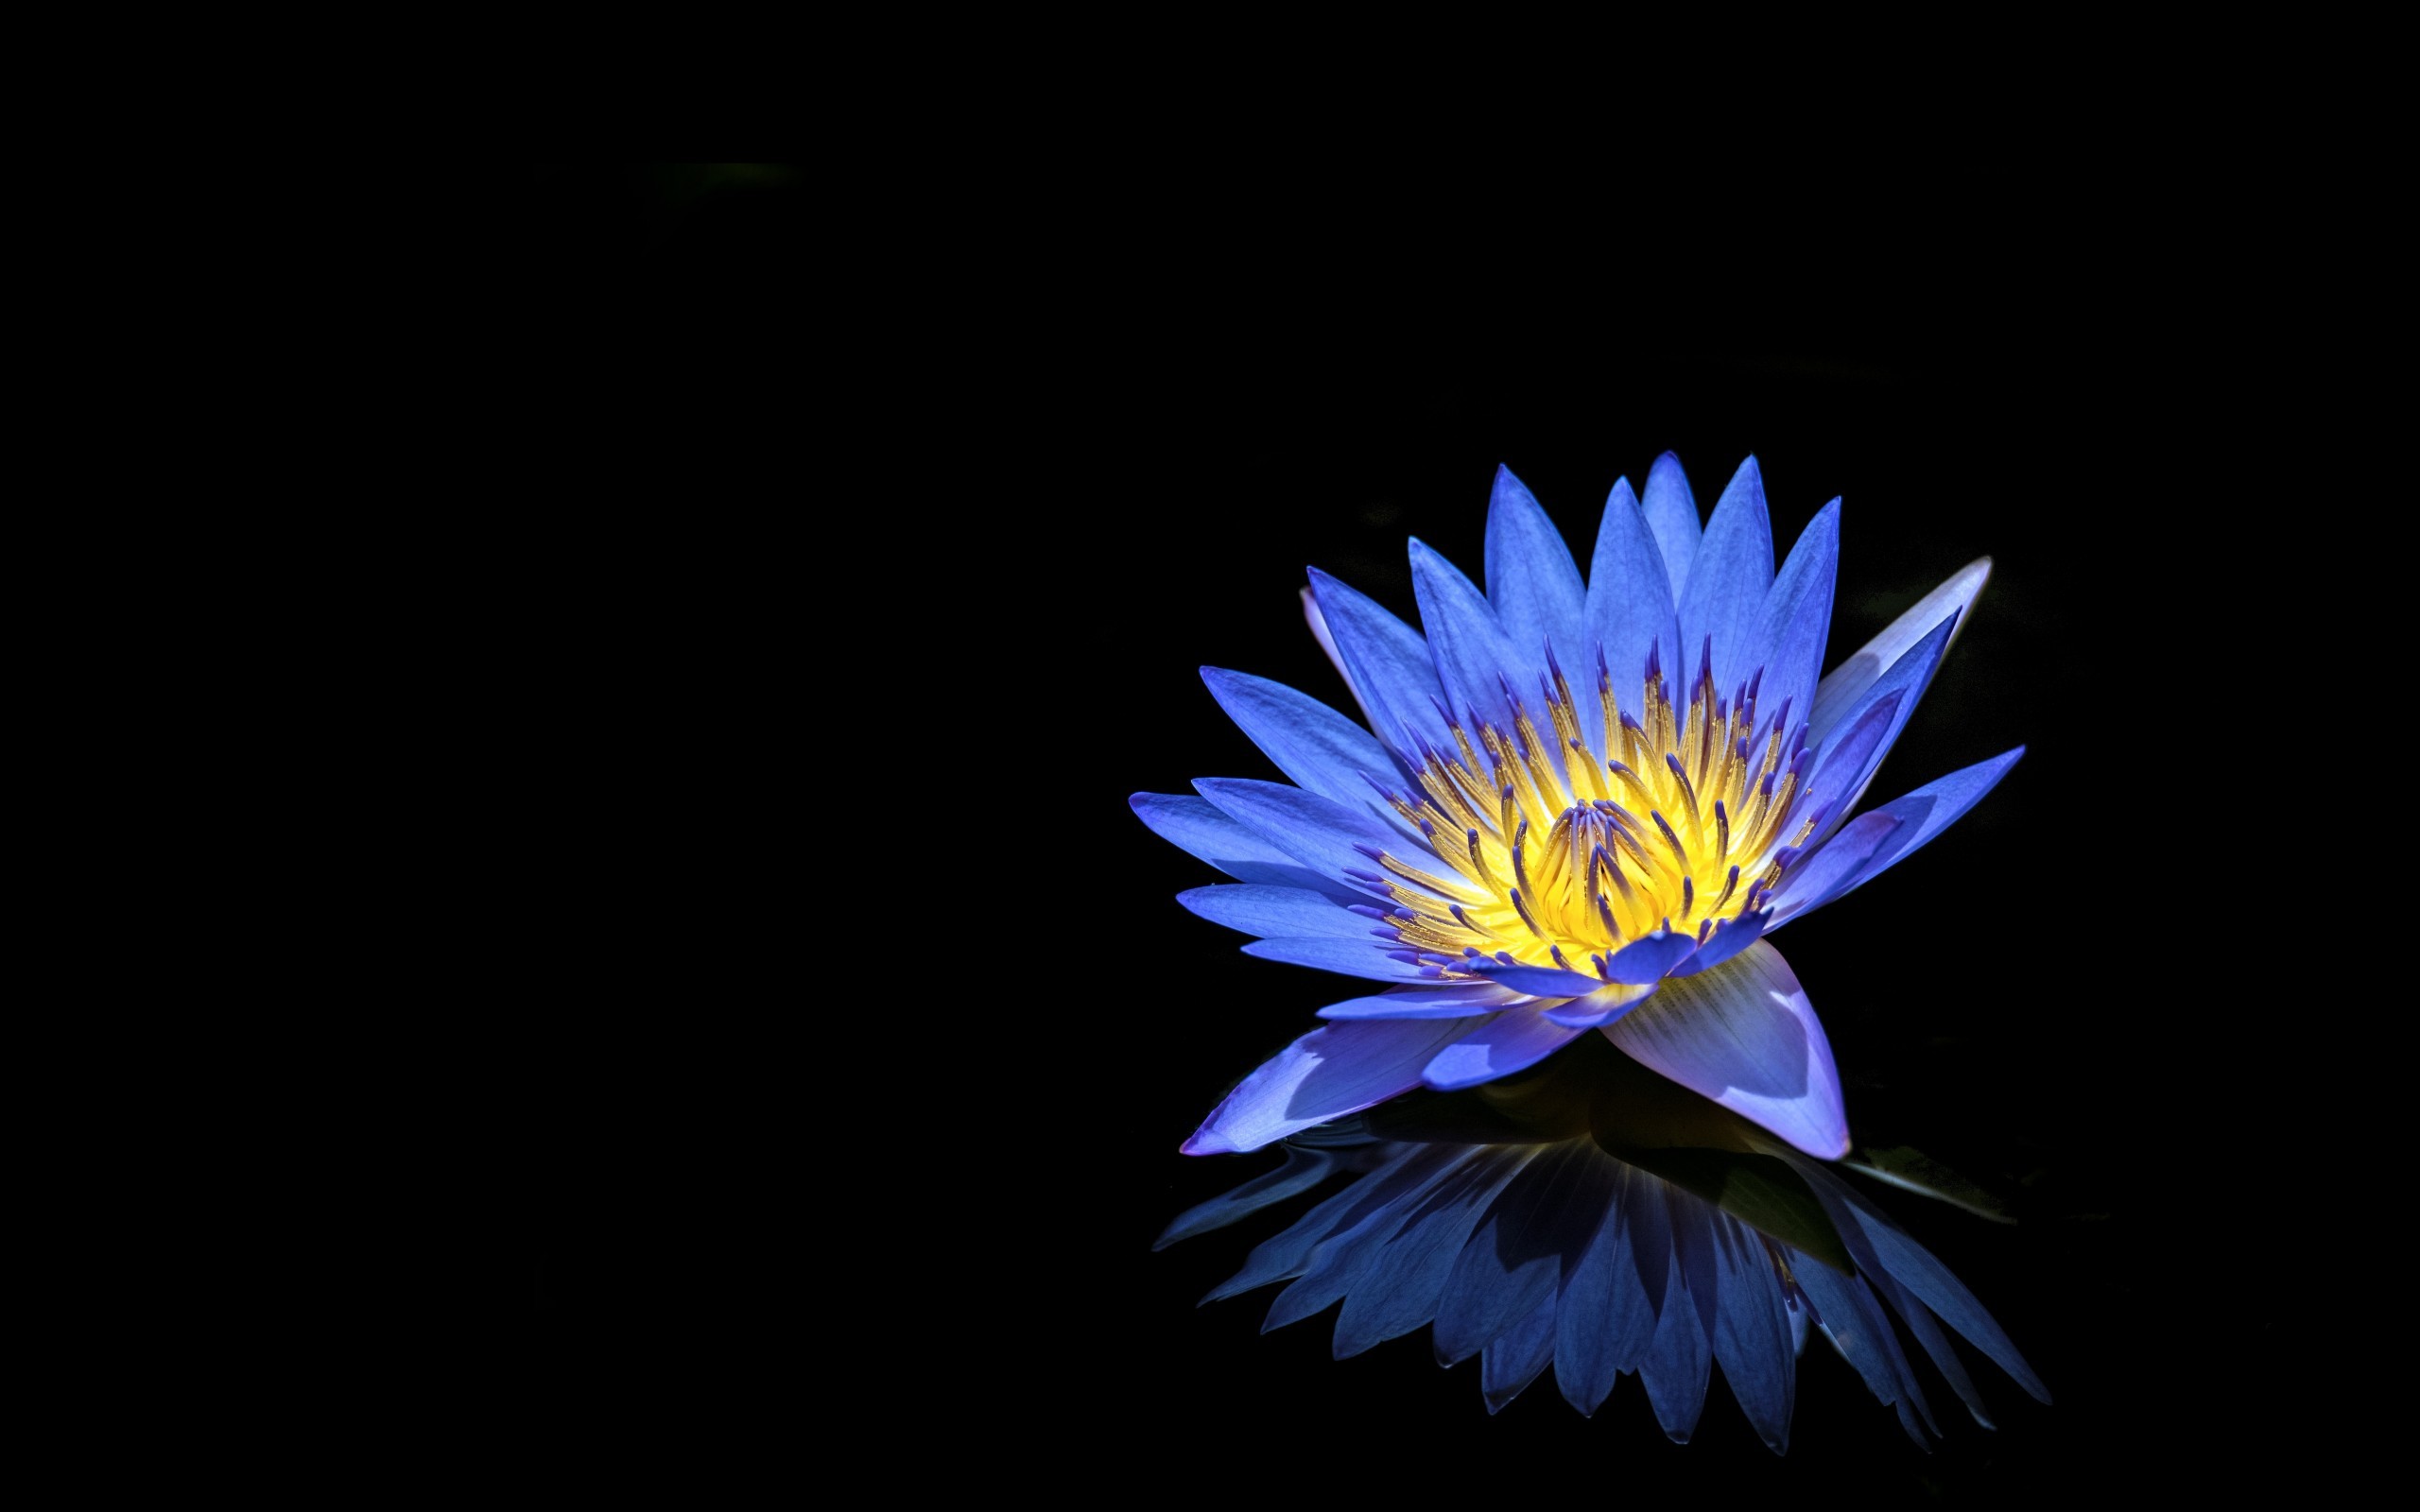 Blue Water Lily, Petals, Reflection - Flower On Black Background - HD Wallpaper 